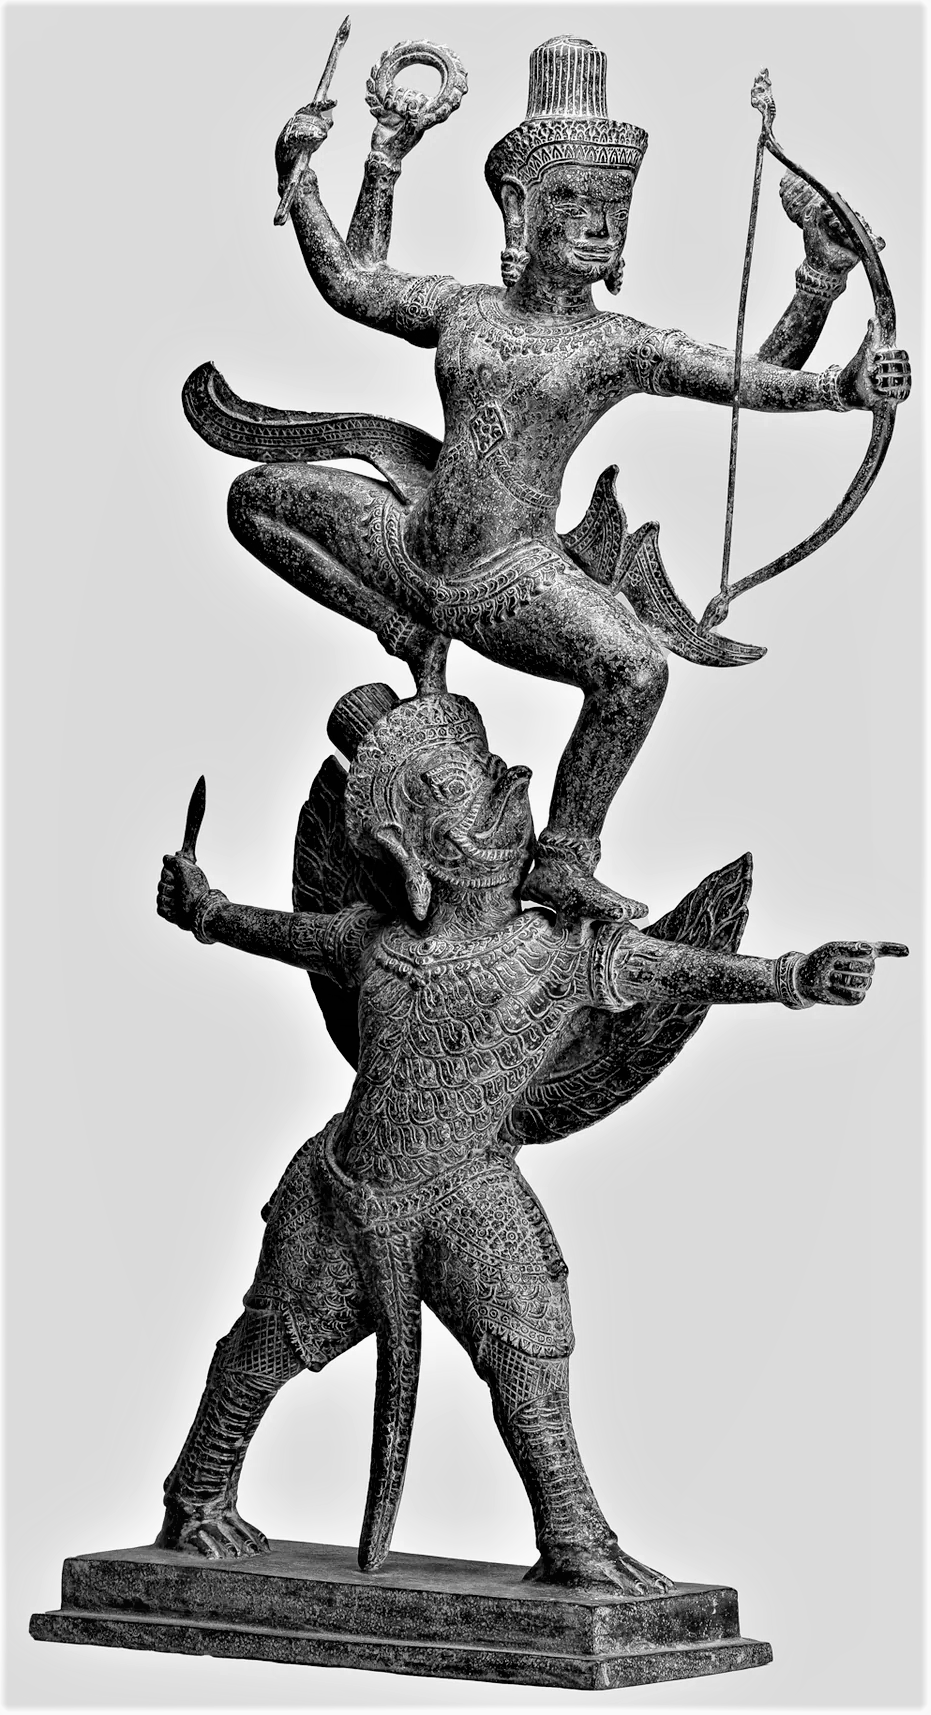 Khmer statue of Vishnu standing on top of Garuda in the midst of battle. Cambodia, 9ᵗʰ-13ᵗʰ Century CE.png